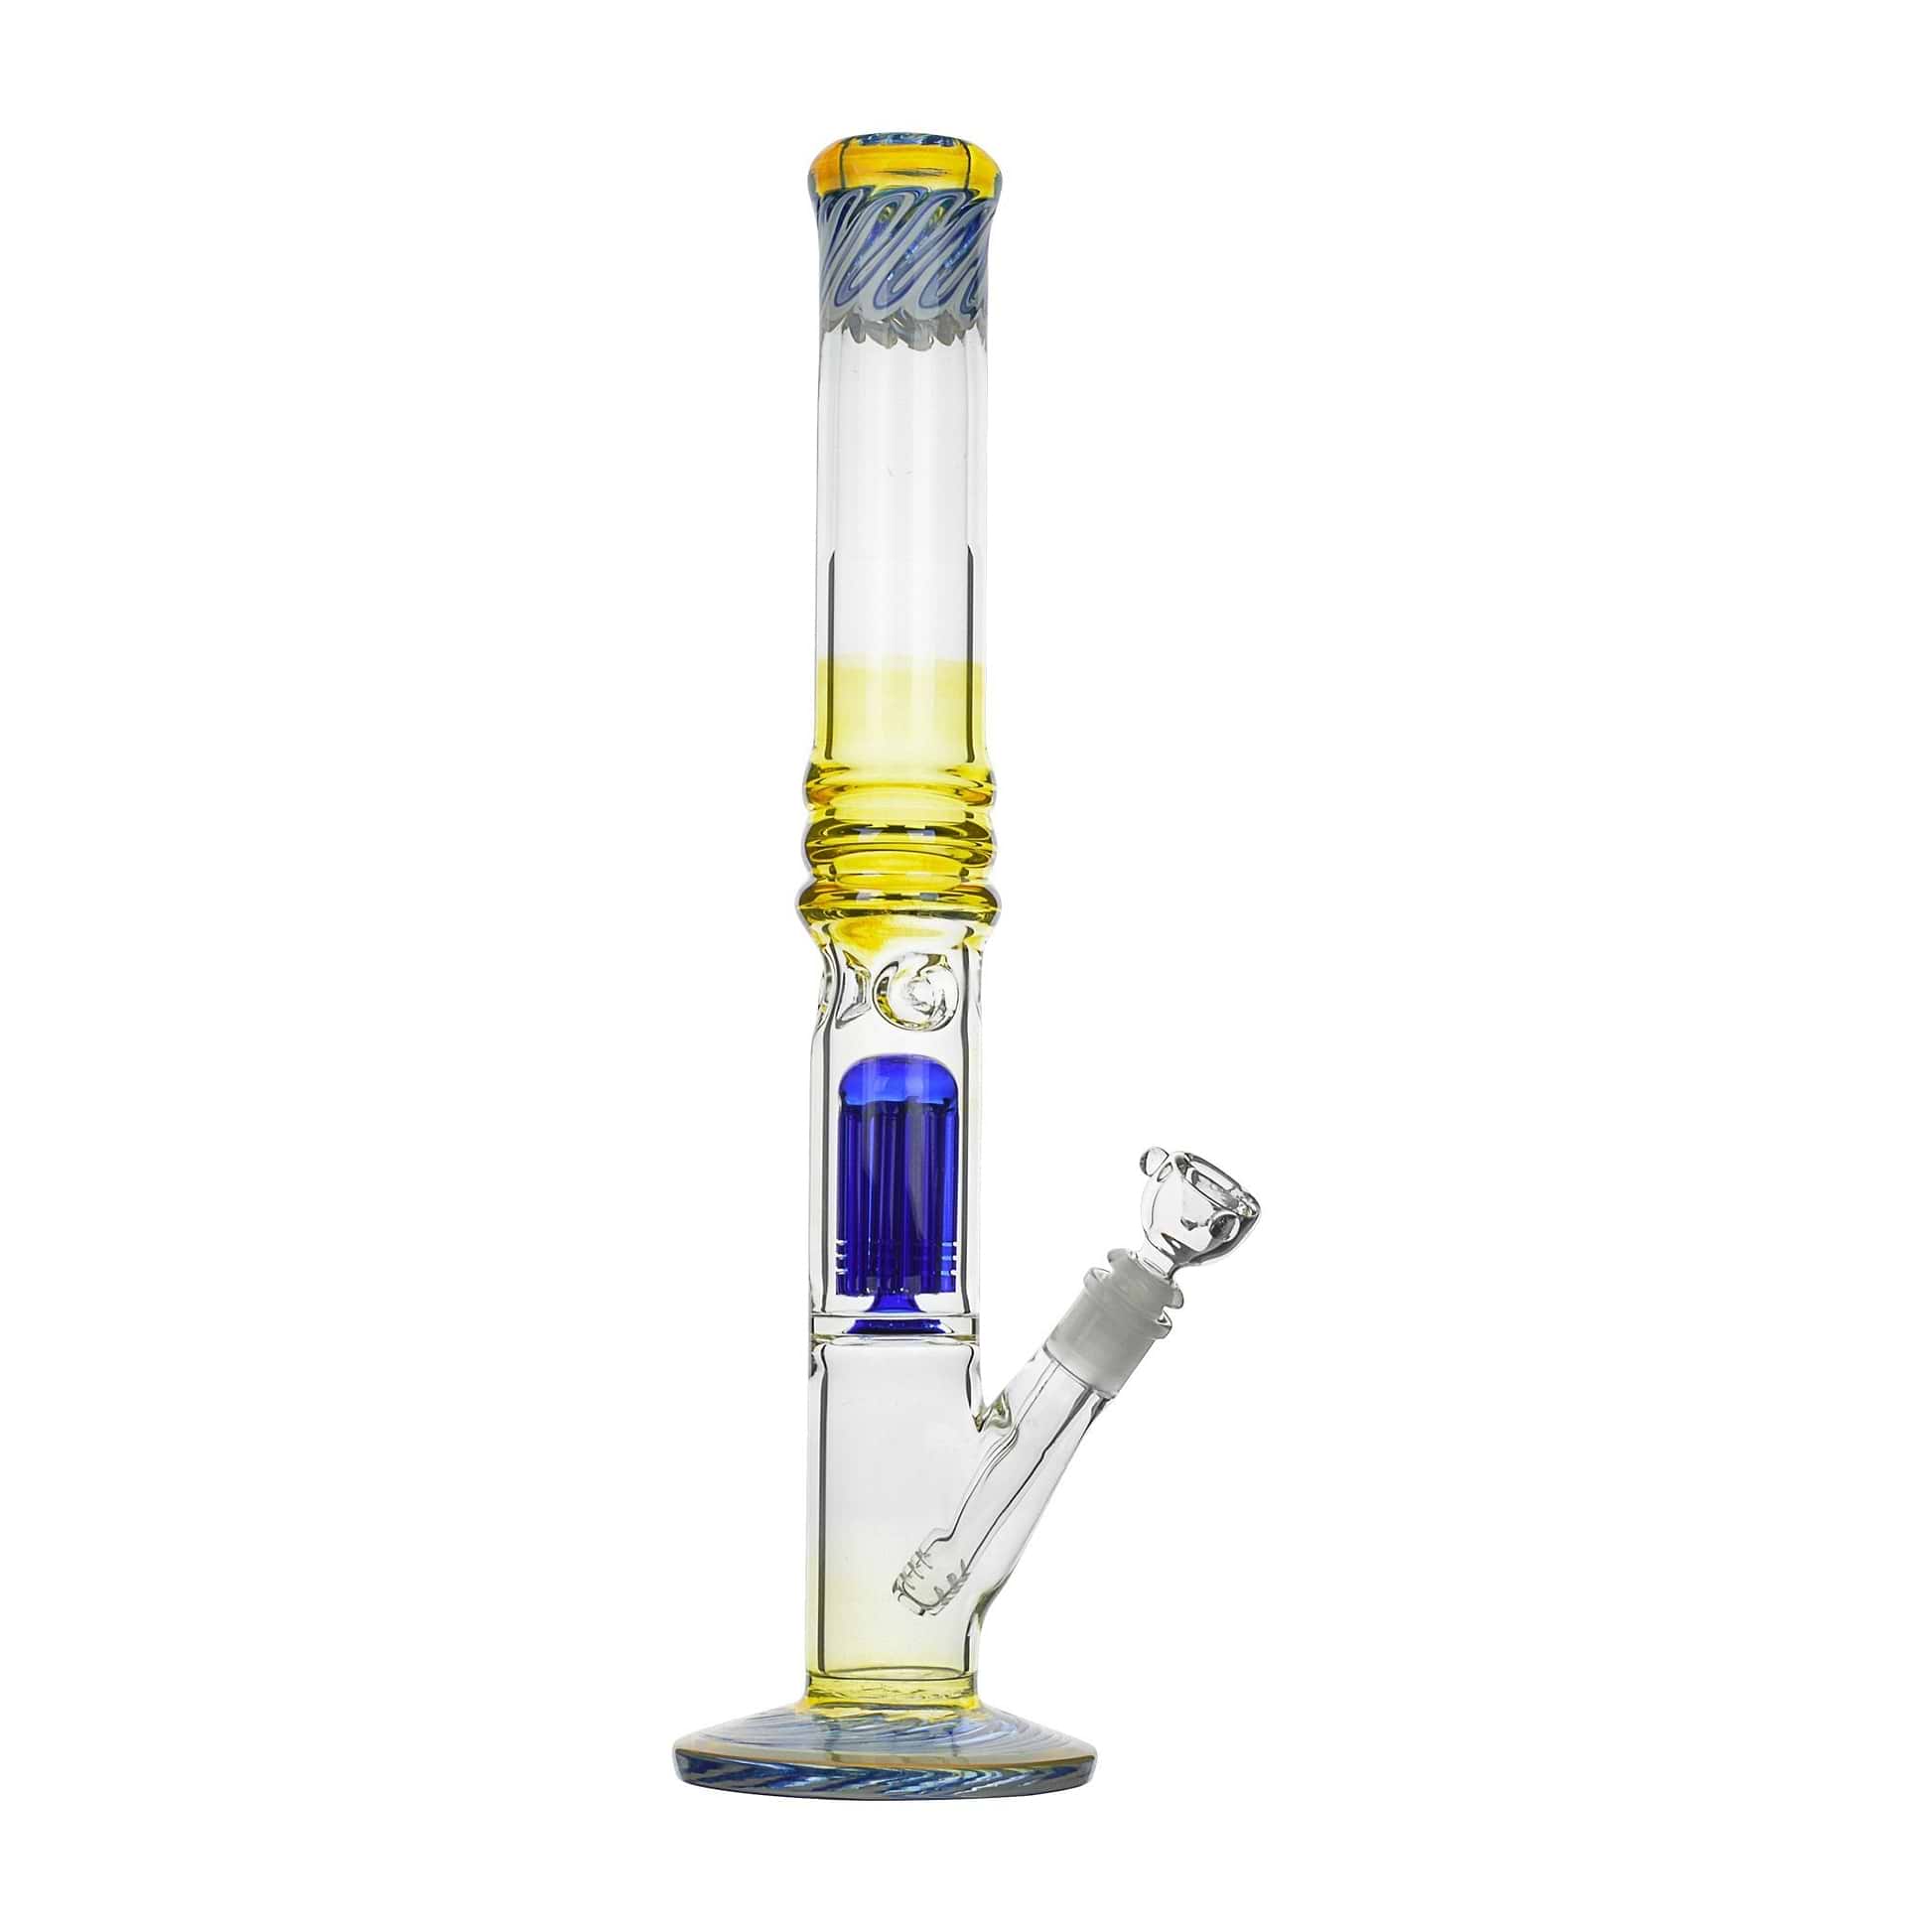 19-inch straight shooter glass bong sturdy body flat face blue riptide look swirl design on top with ice catcher